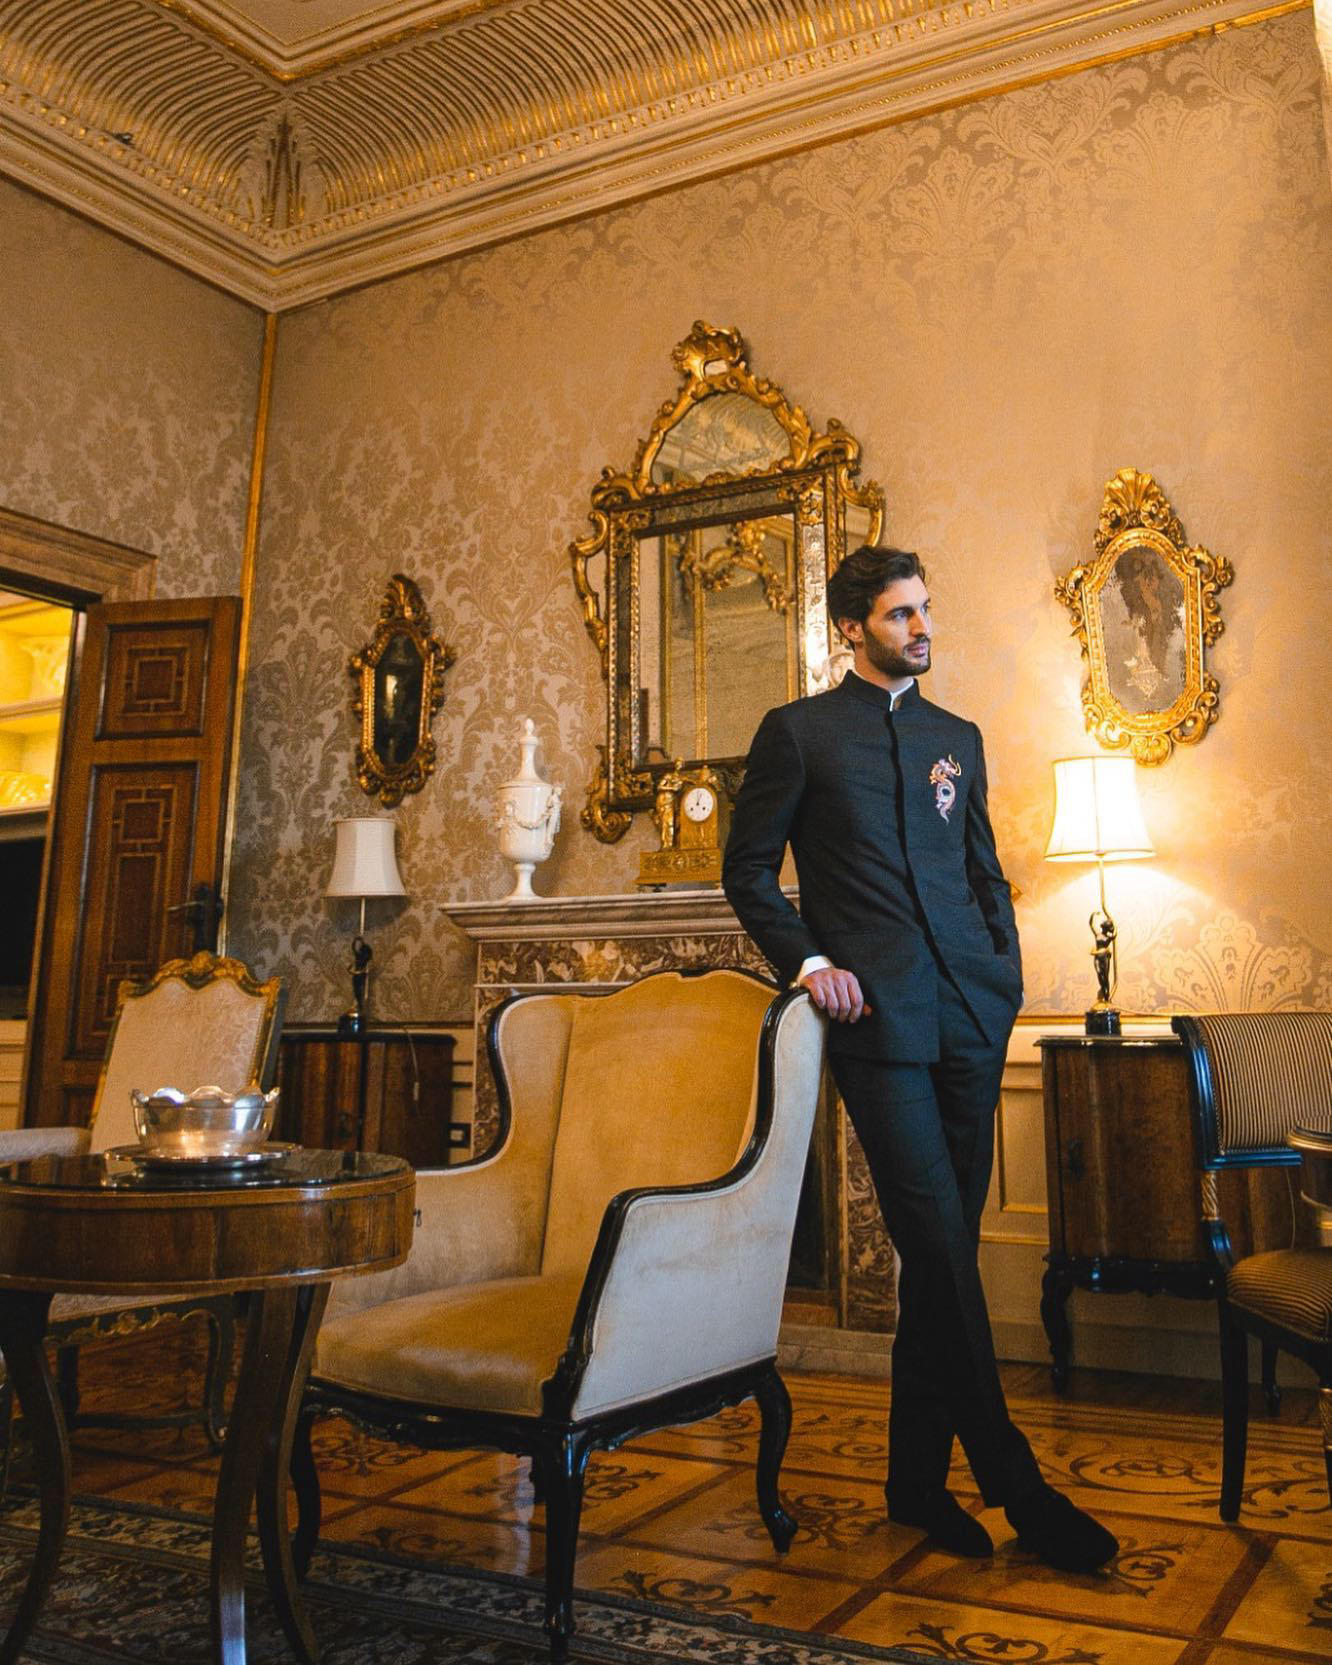 image  1 Hotel Danieli, Venice - The classic elegance of artisanal tailor Franco Puppato's creations blends g